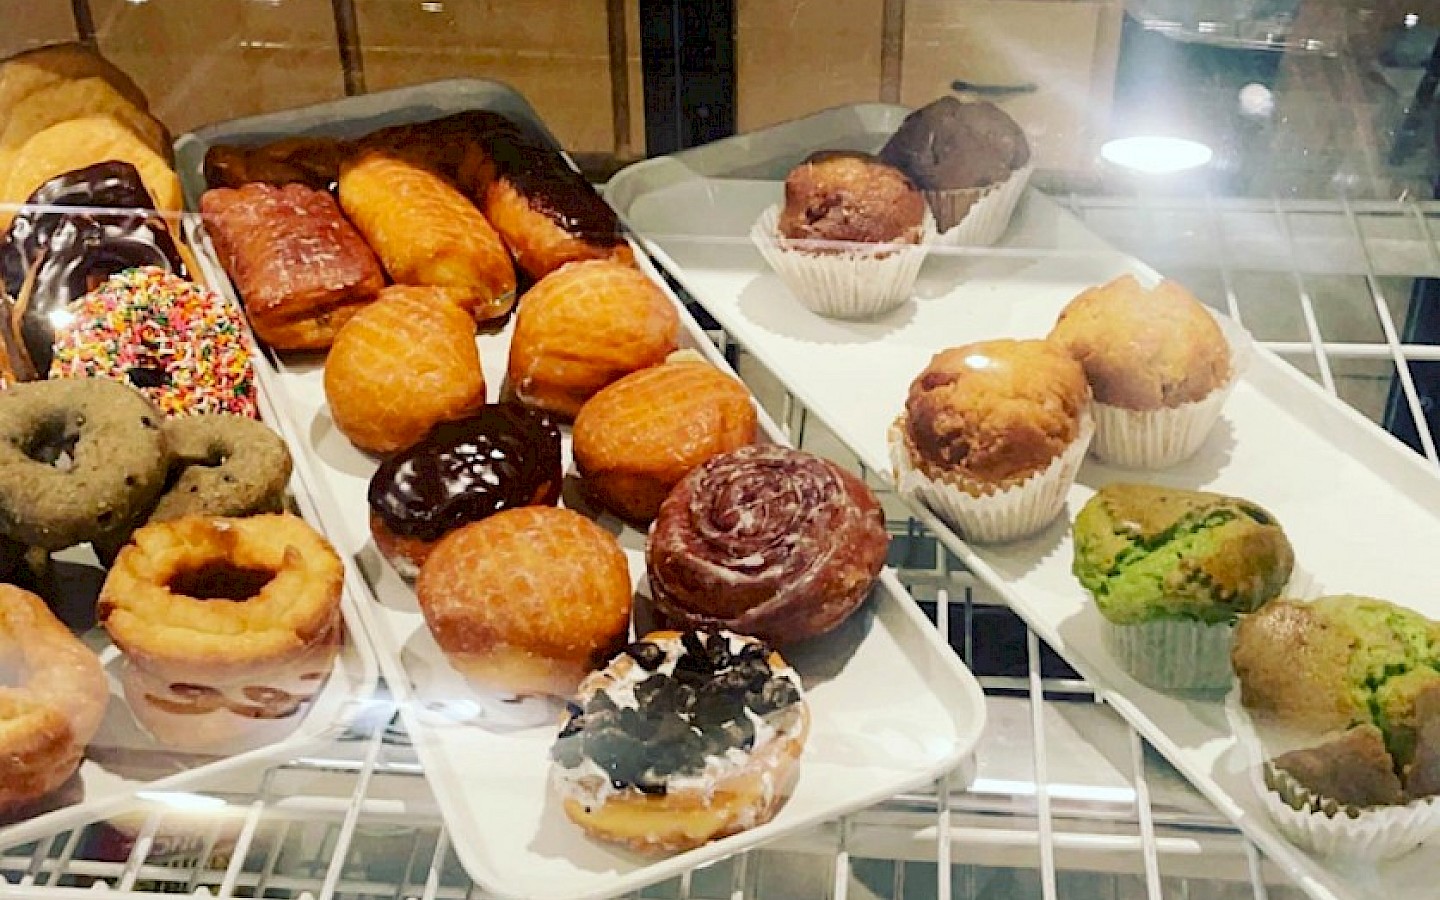 trays of locally made donuts and muffins at a coffee shop